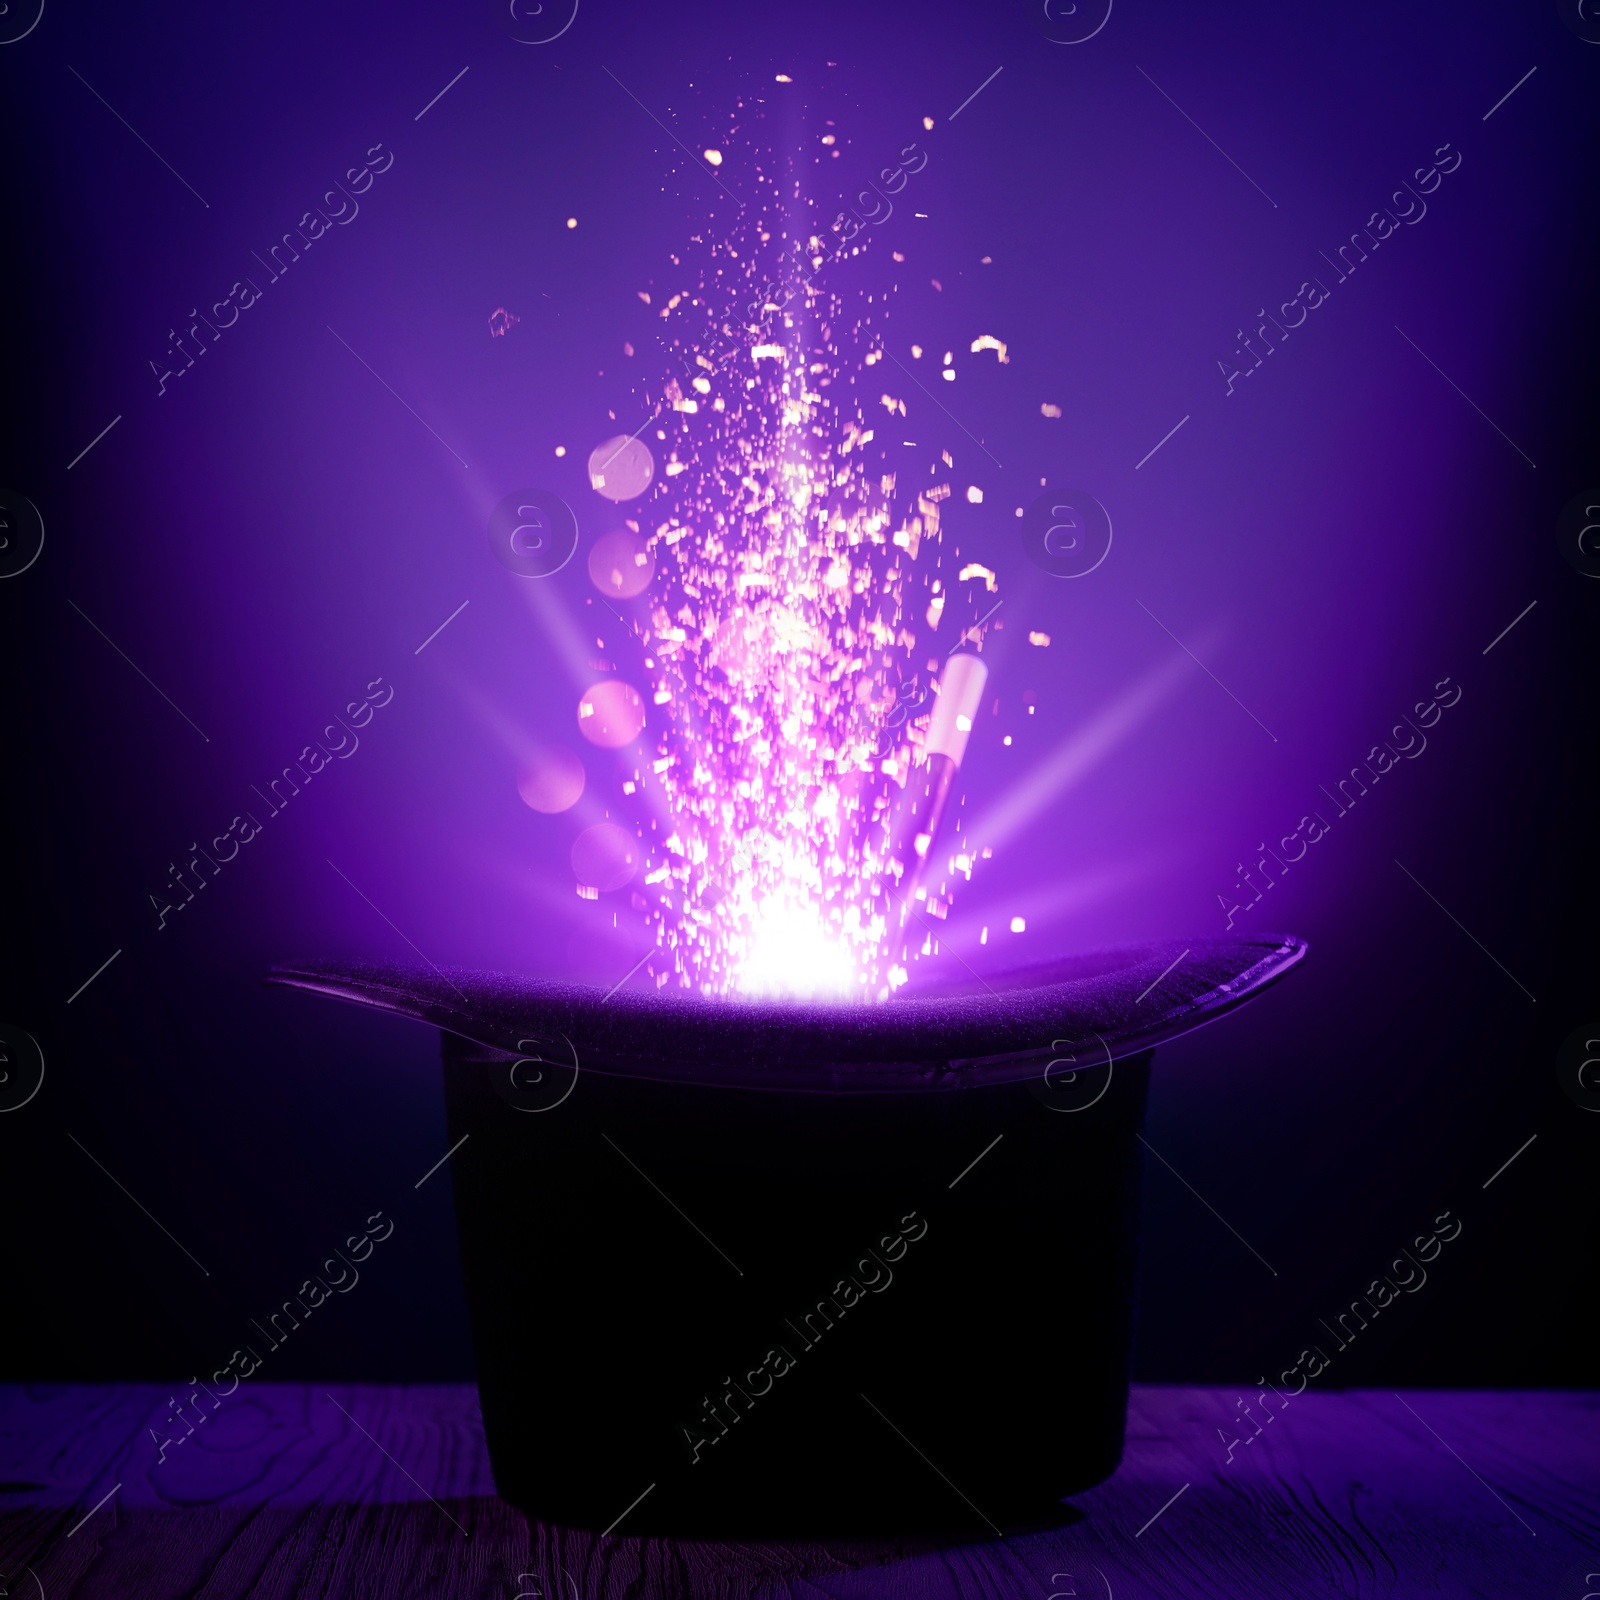 Image of Wizard's hat with magical light and wand in darkness